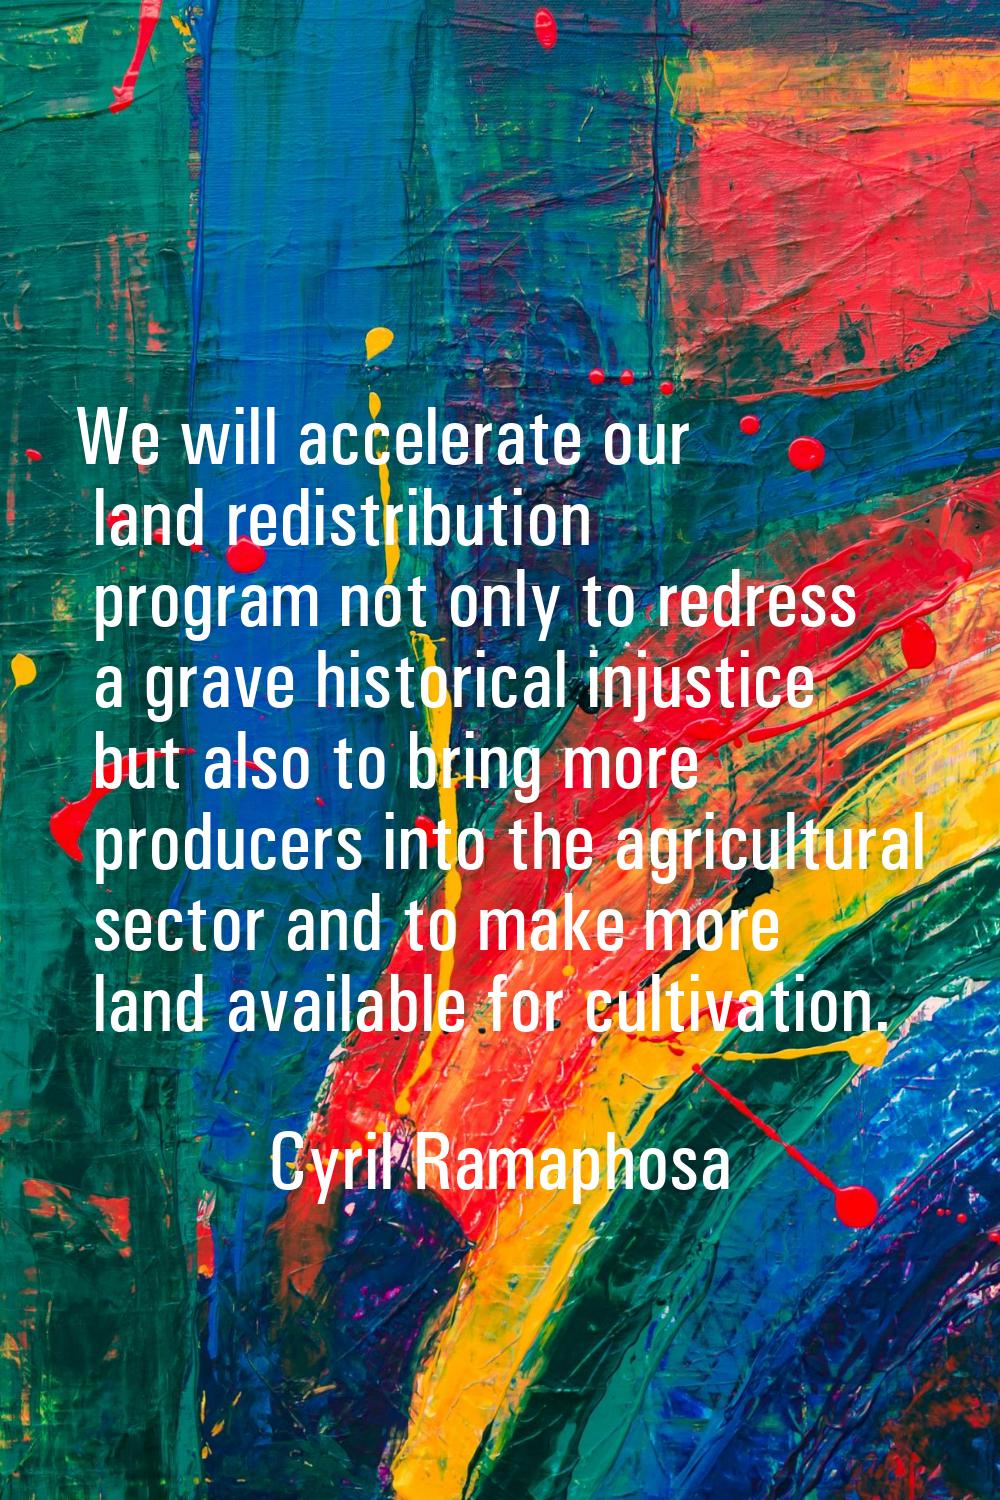 We will accelerate our land redistribution program not only to redress a grave historical injustice